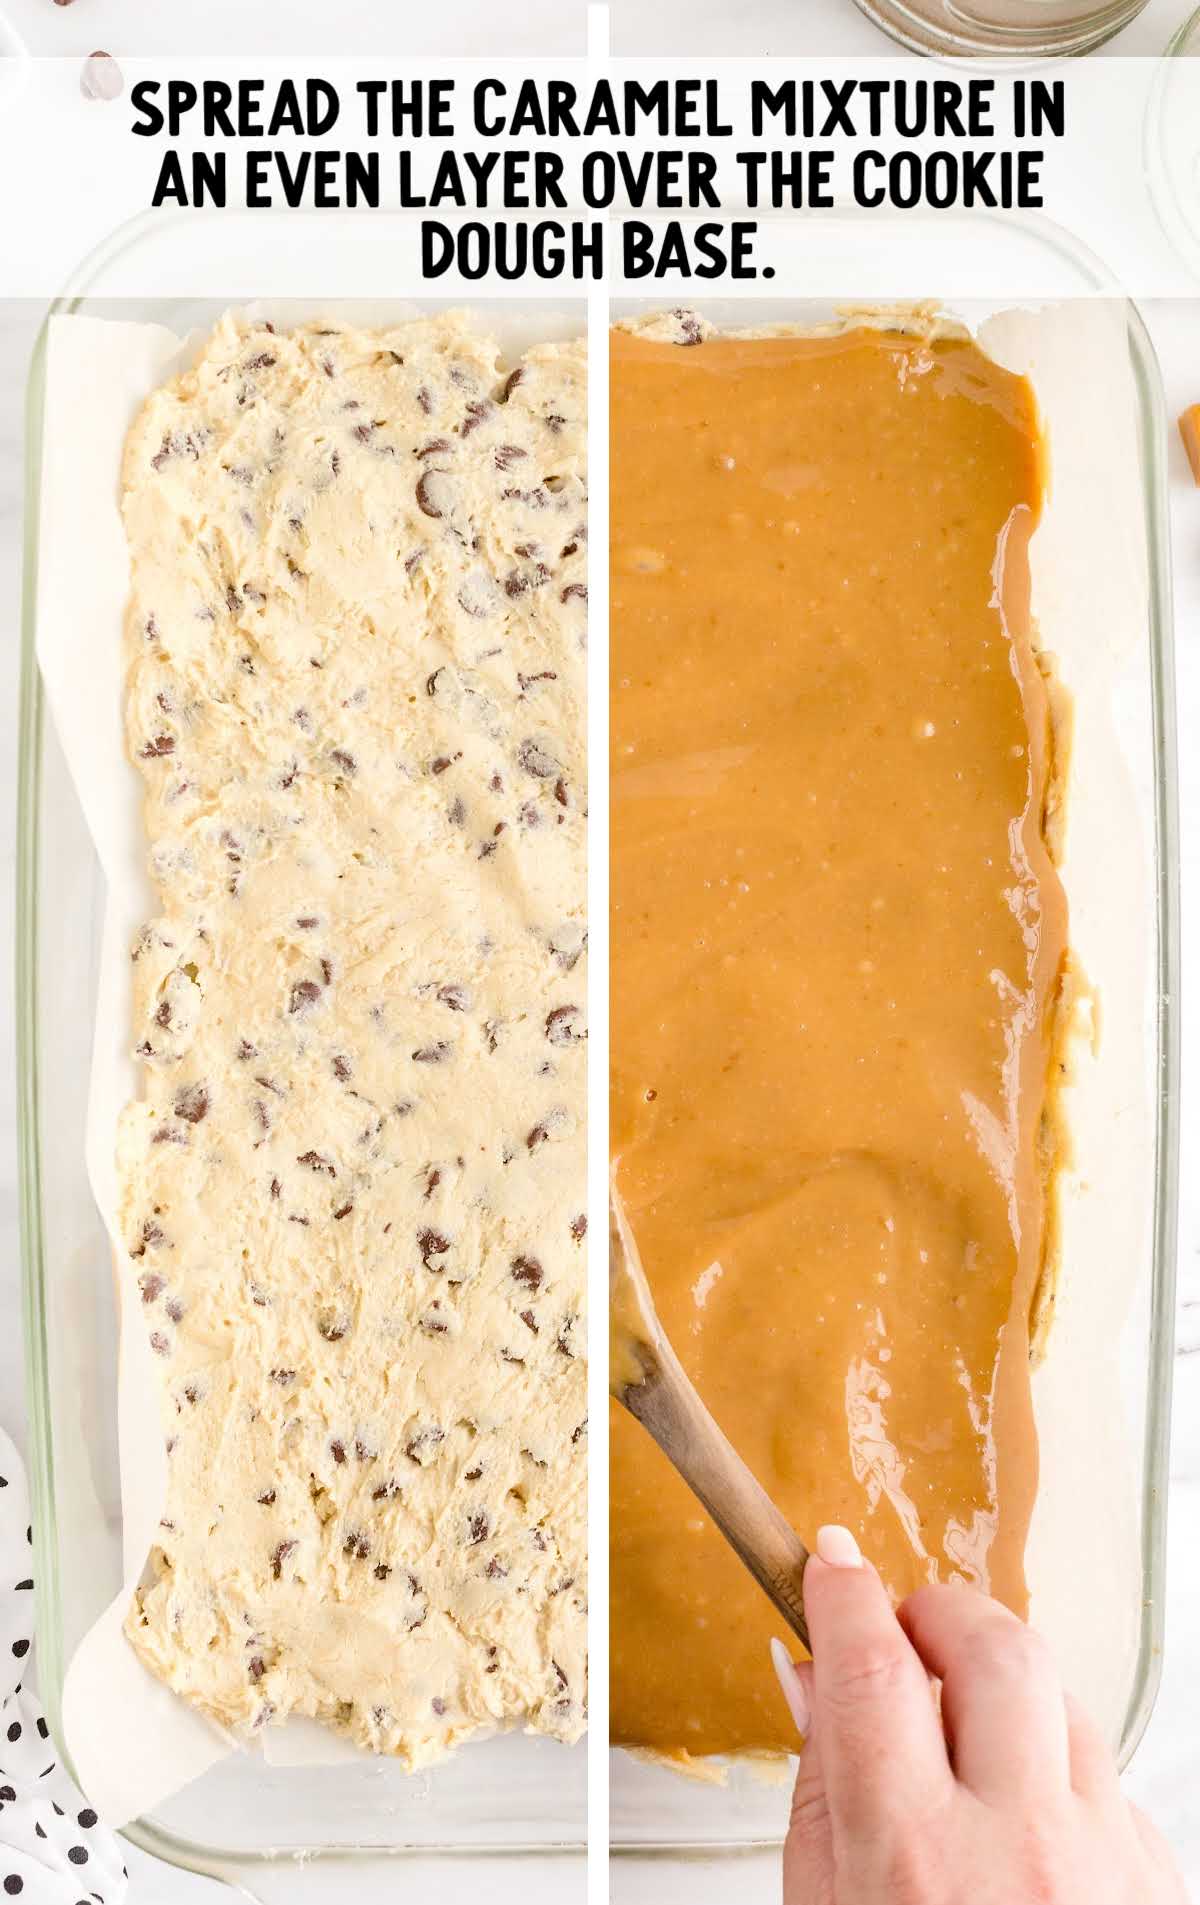 cookie dough being spread in a baking dish then topped with the caramel mixture